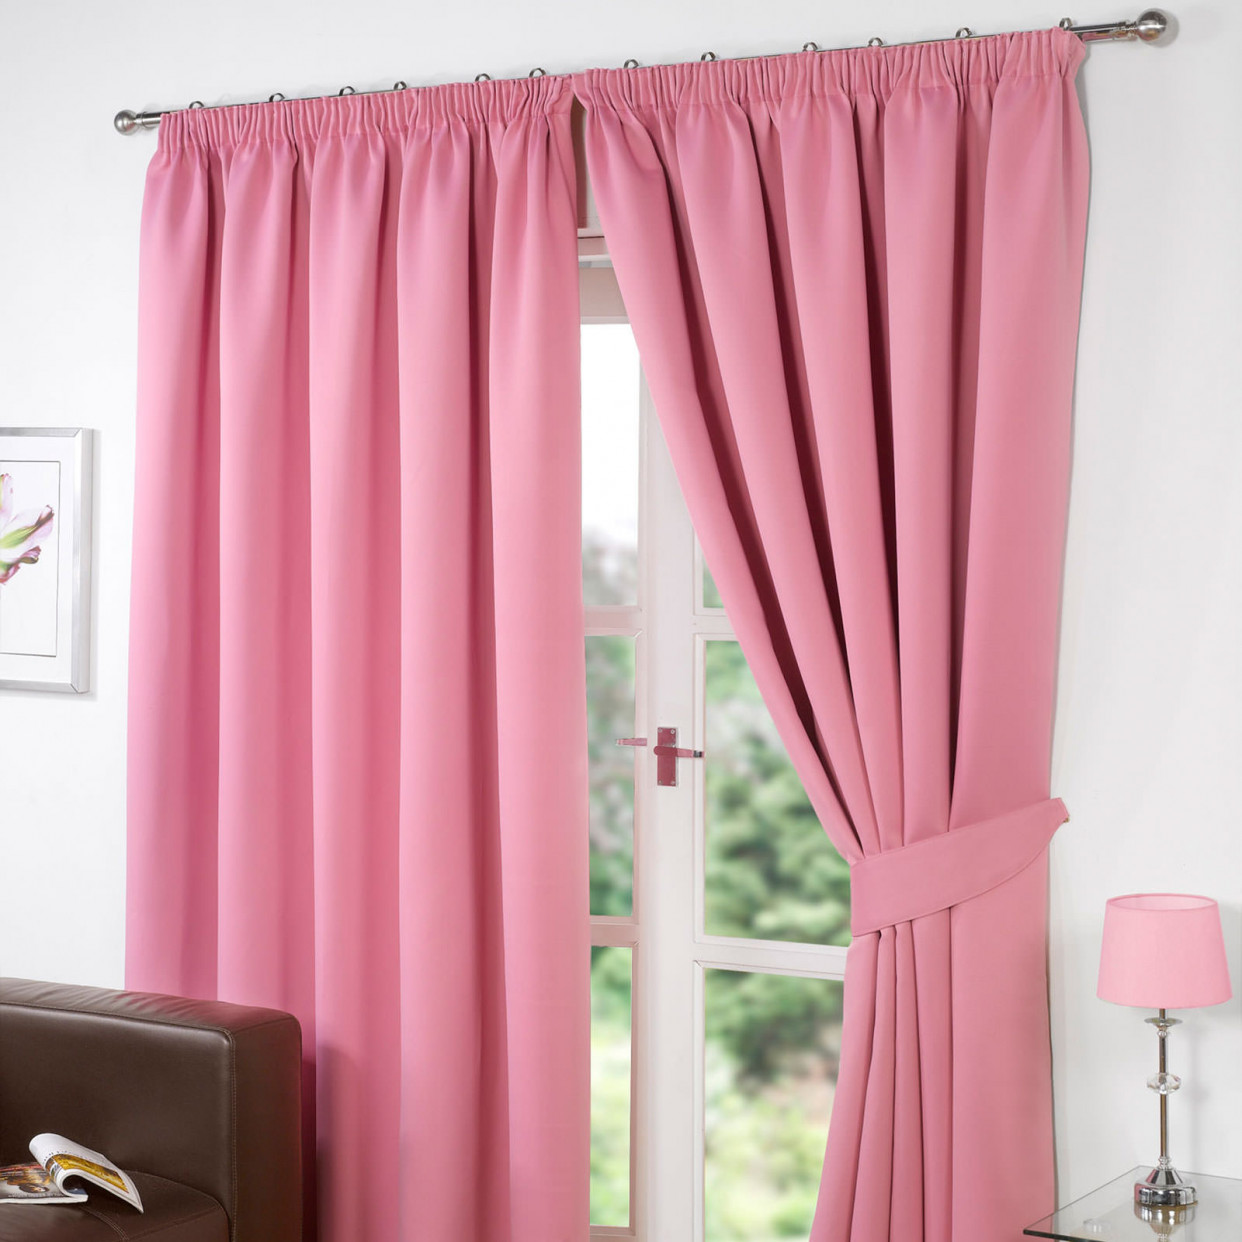 Pencil Pleat Thermal Blackout Fully Lined Curtains - Pink 66x90>